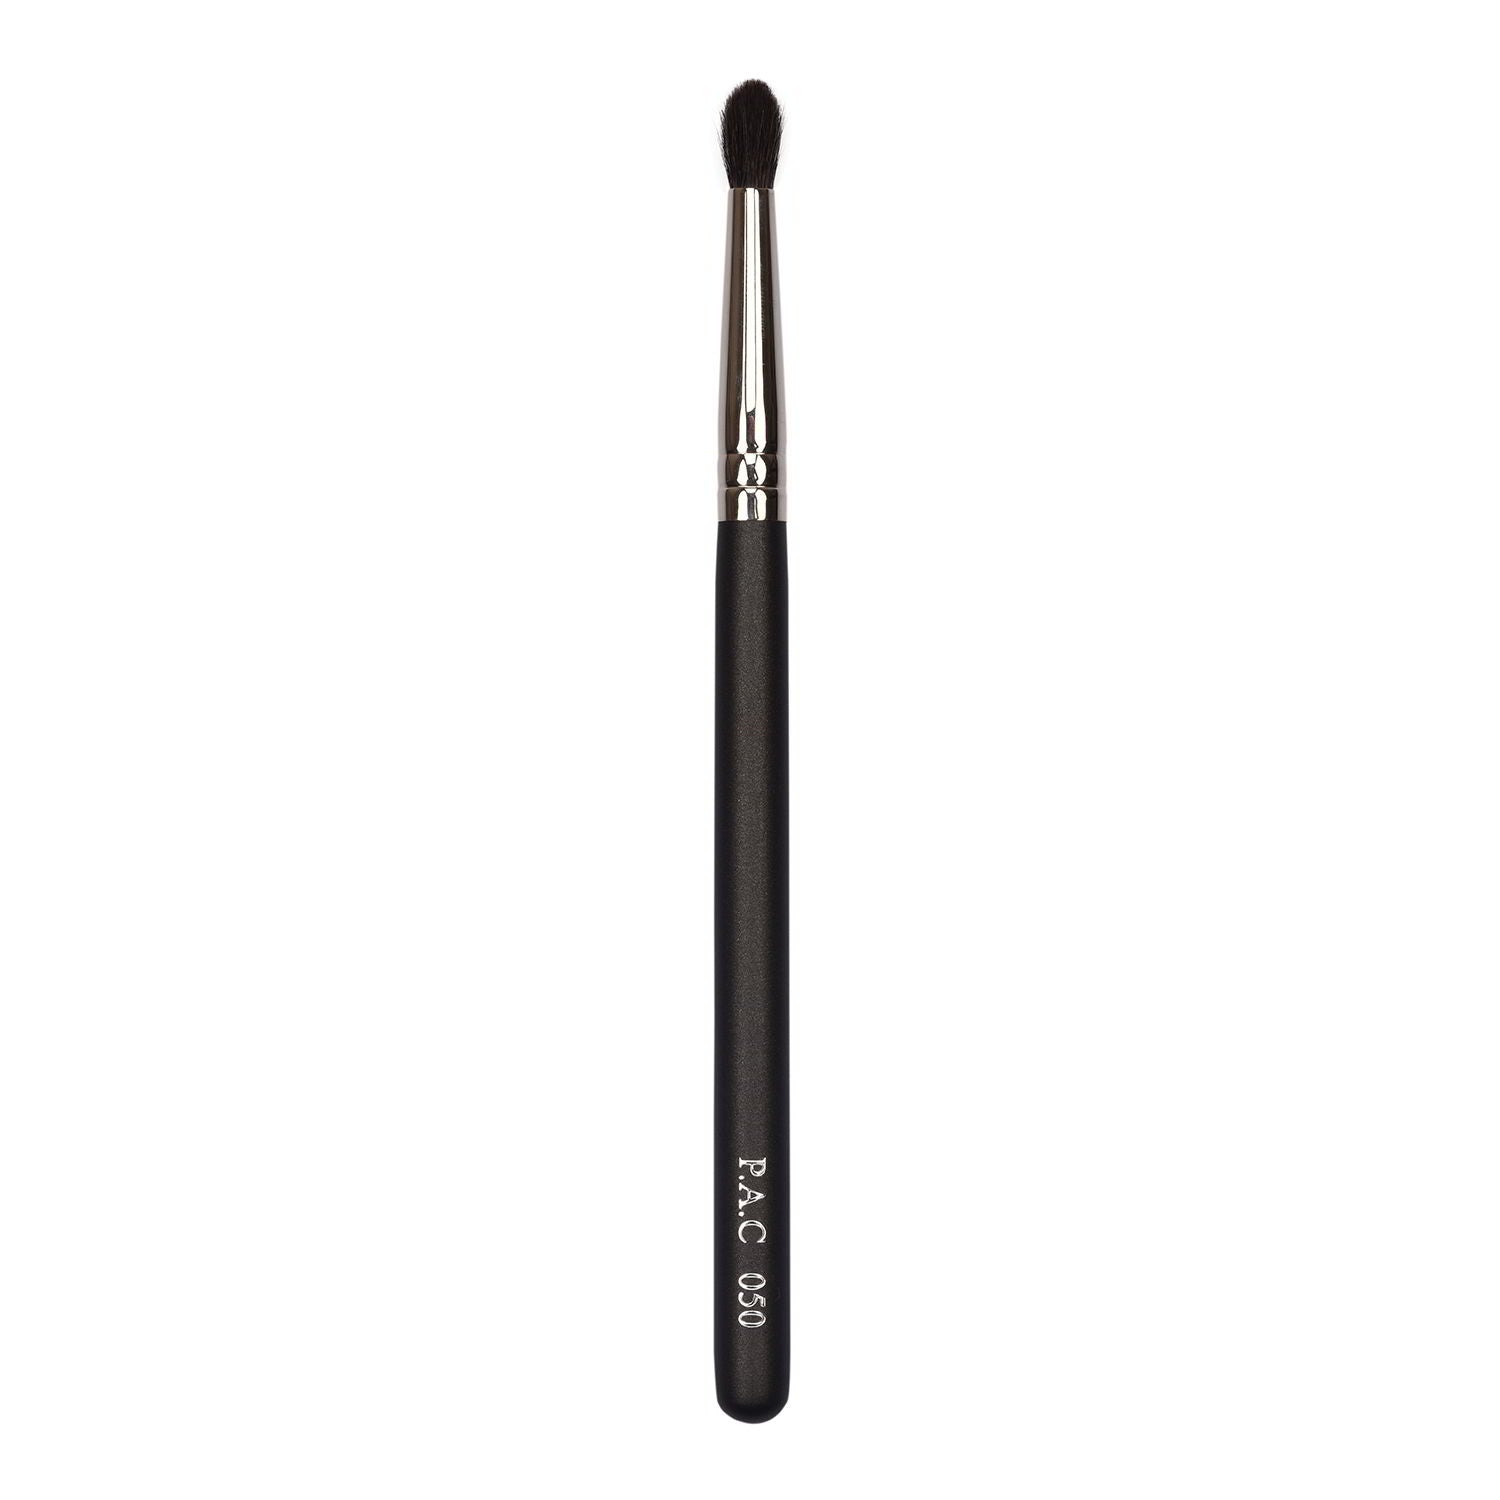 PAC Concealer Brush 050 PAC